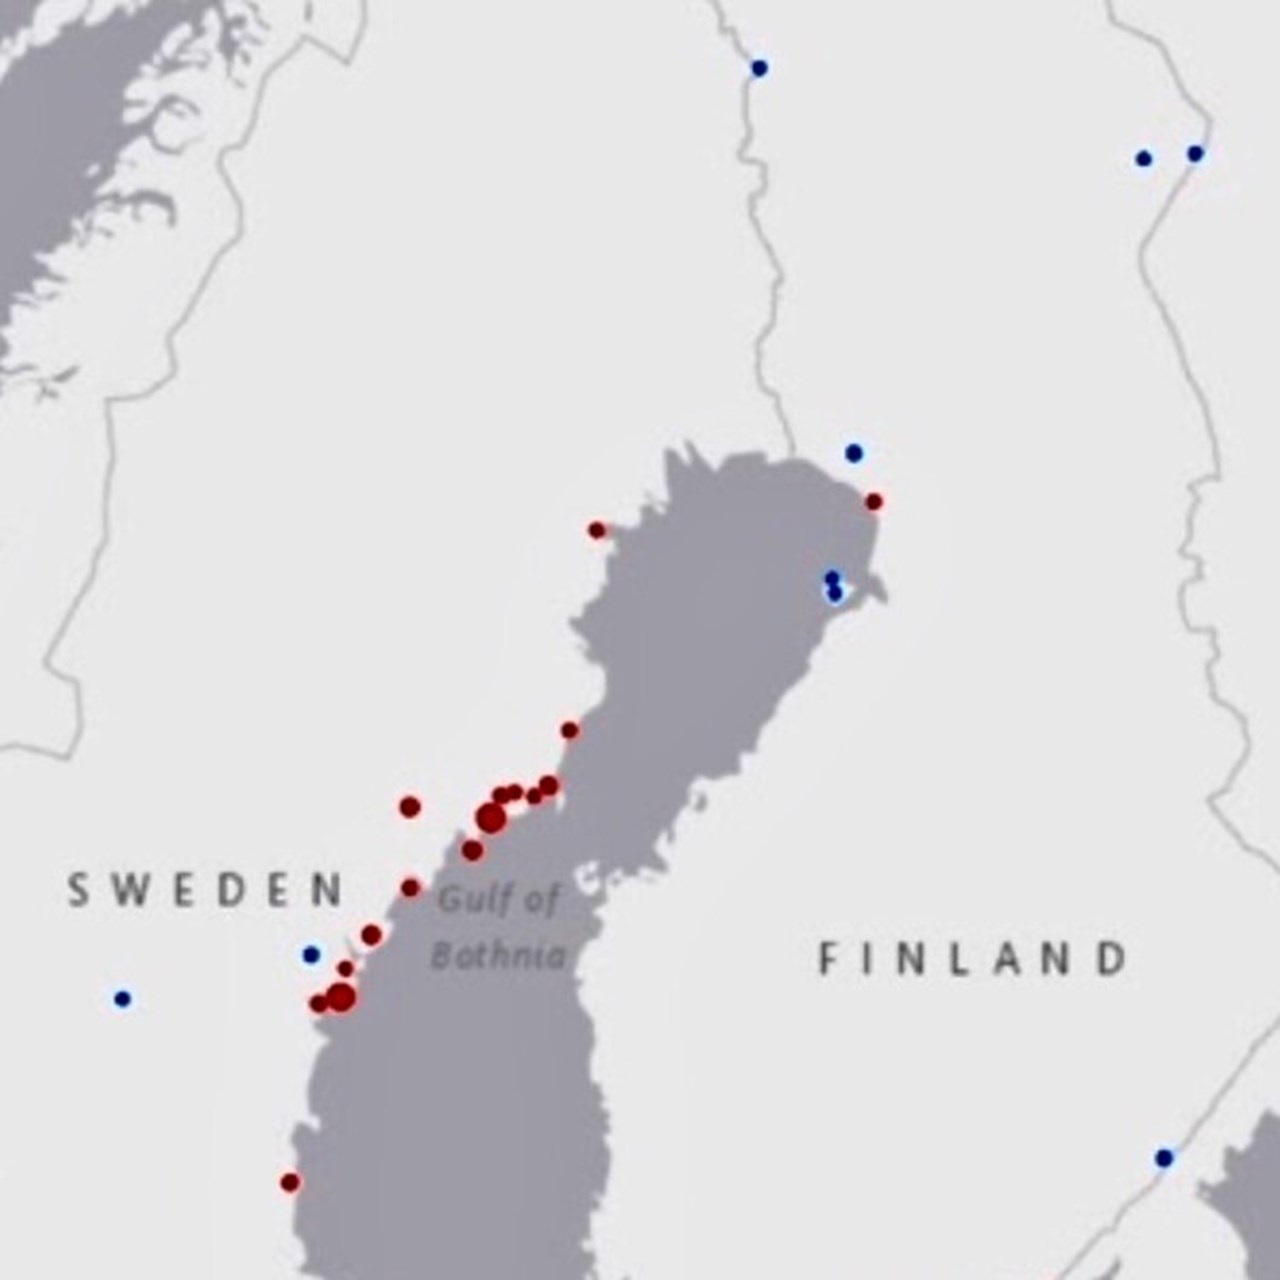 Shows a clipart of a larger map in gray and white over northern Scandinavia, with red and blue dots